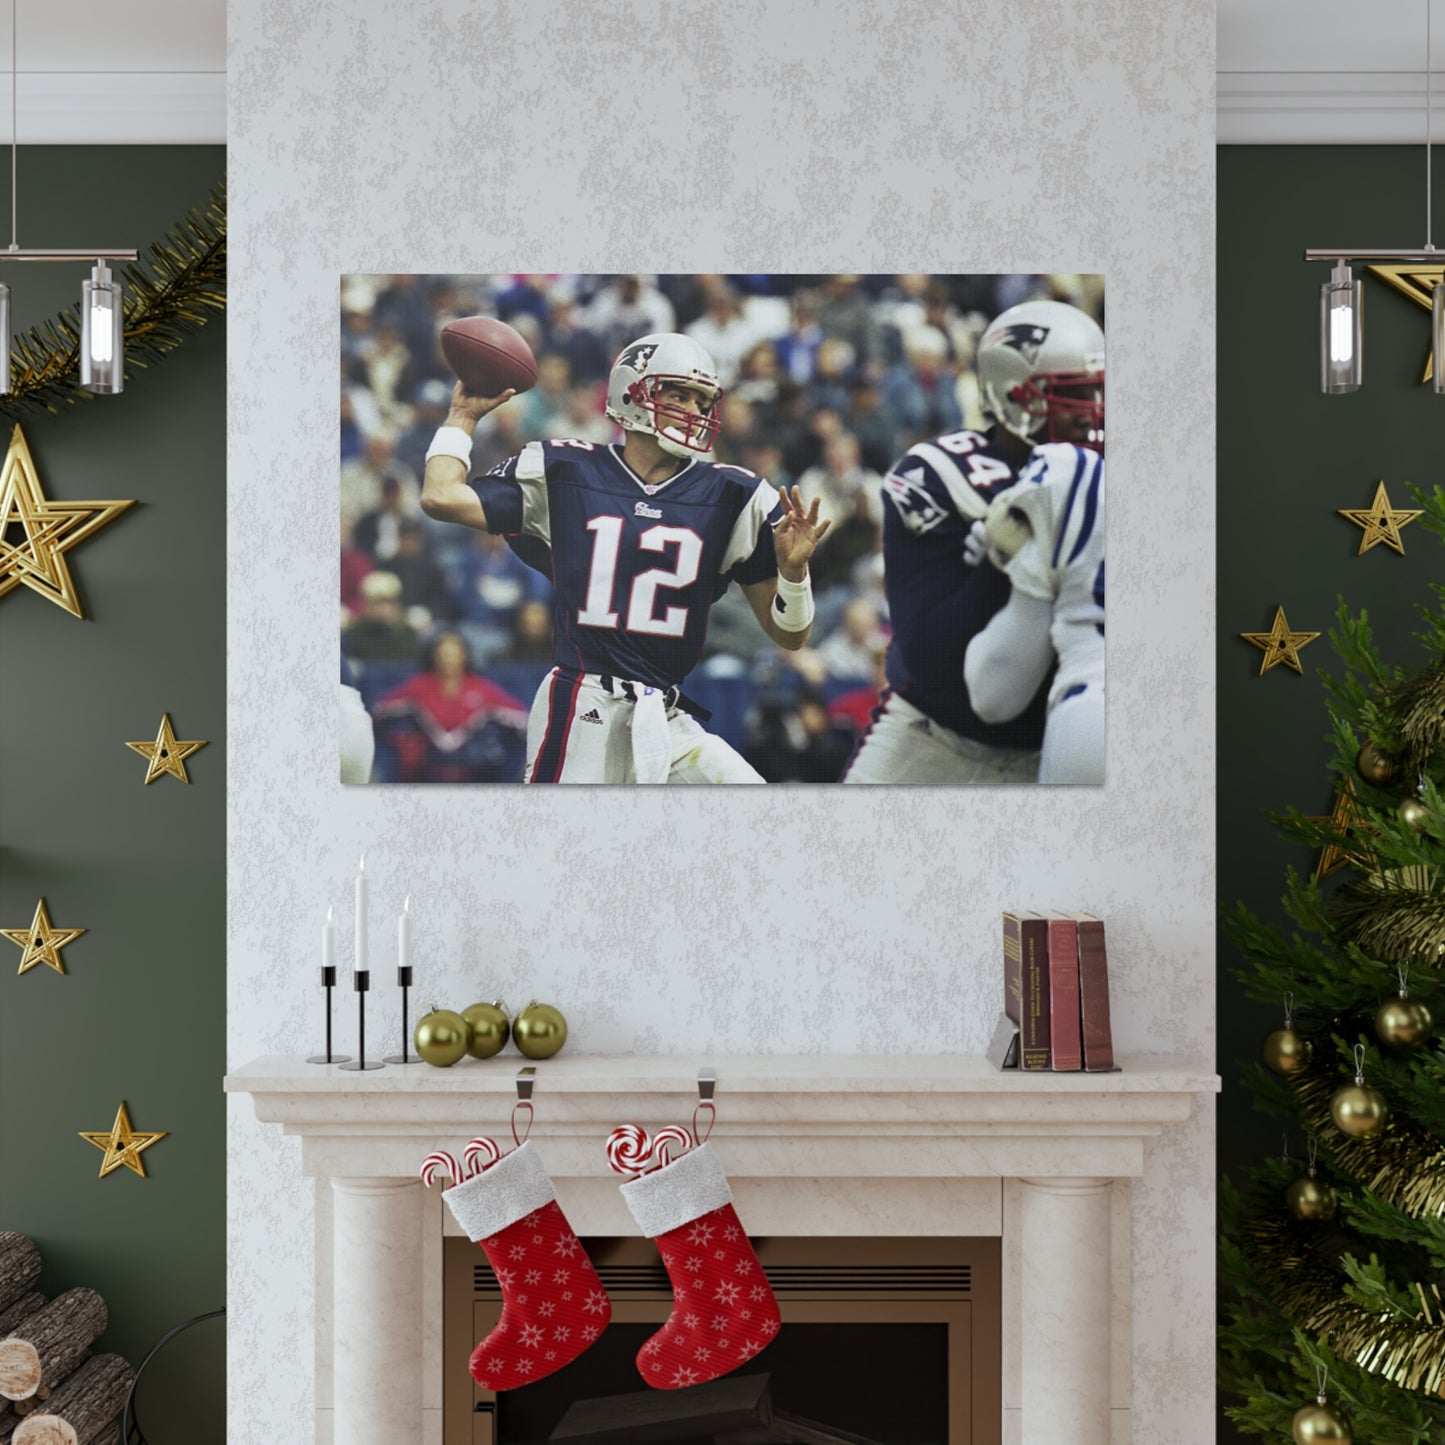 Tom Brady Making A Play With The New England Patriots Canvas Wall Art